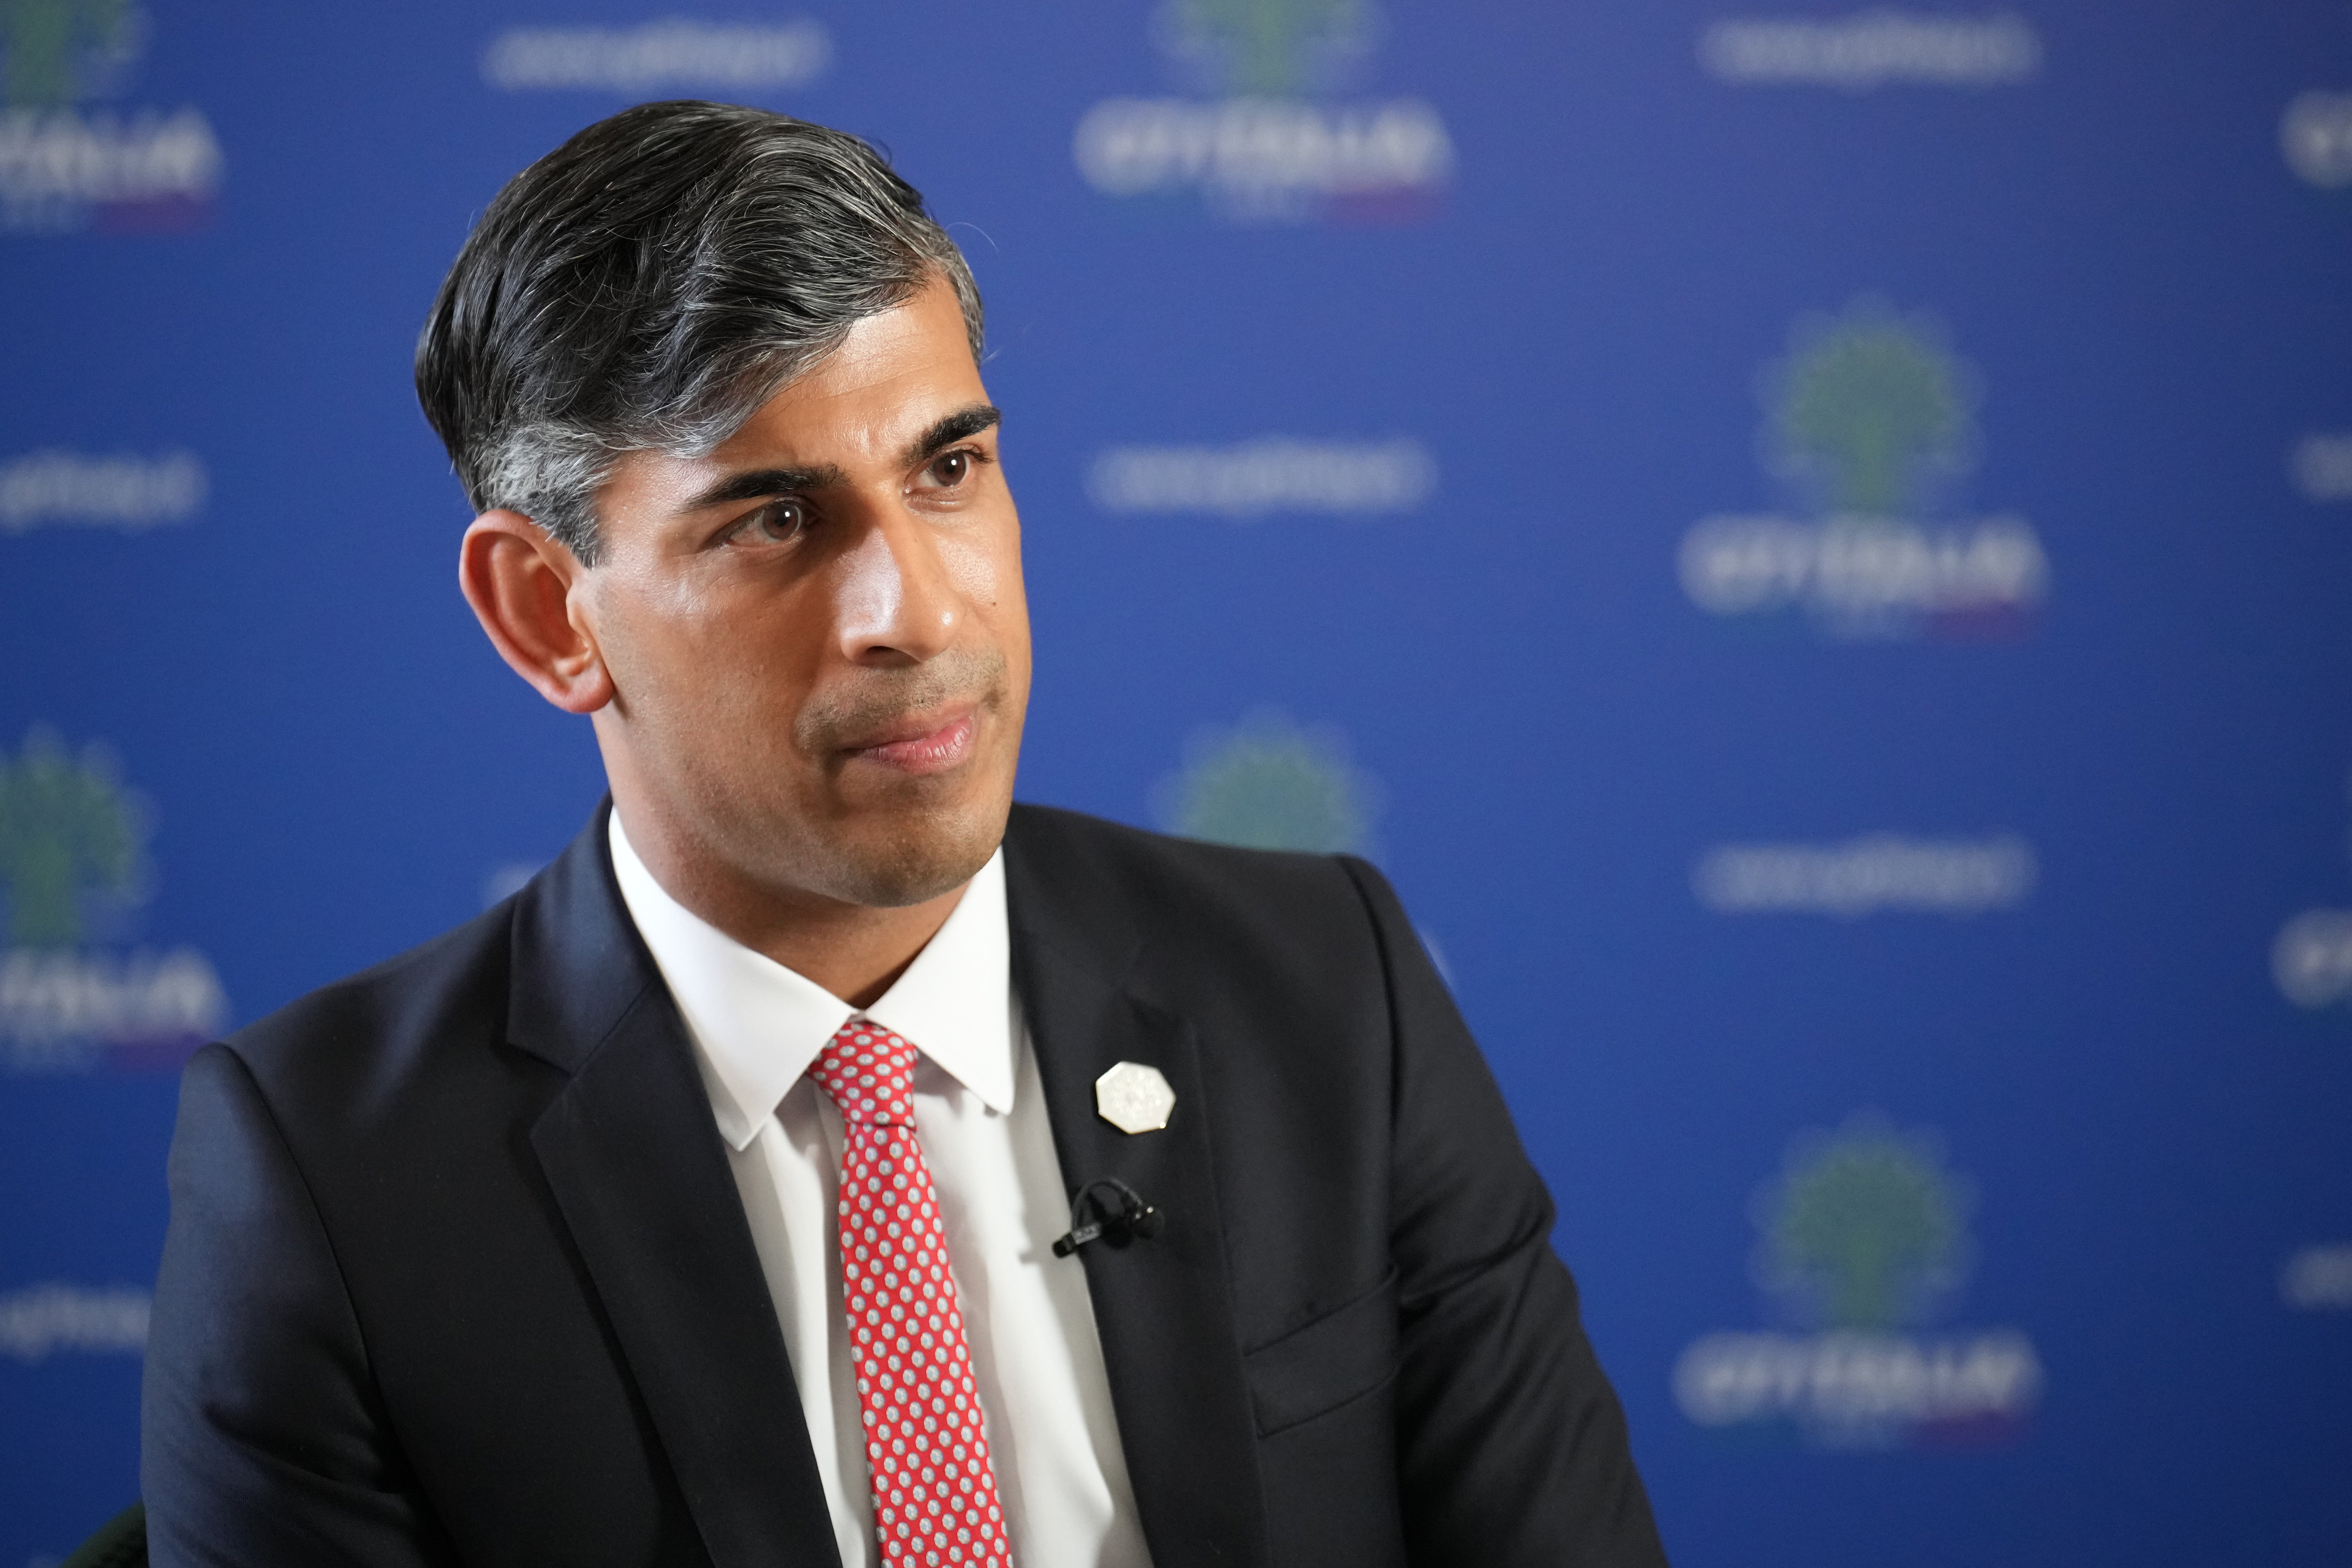 Rishi Sunak has had a disastrous election campaign